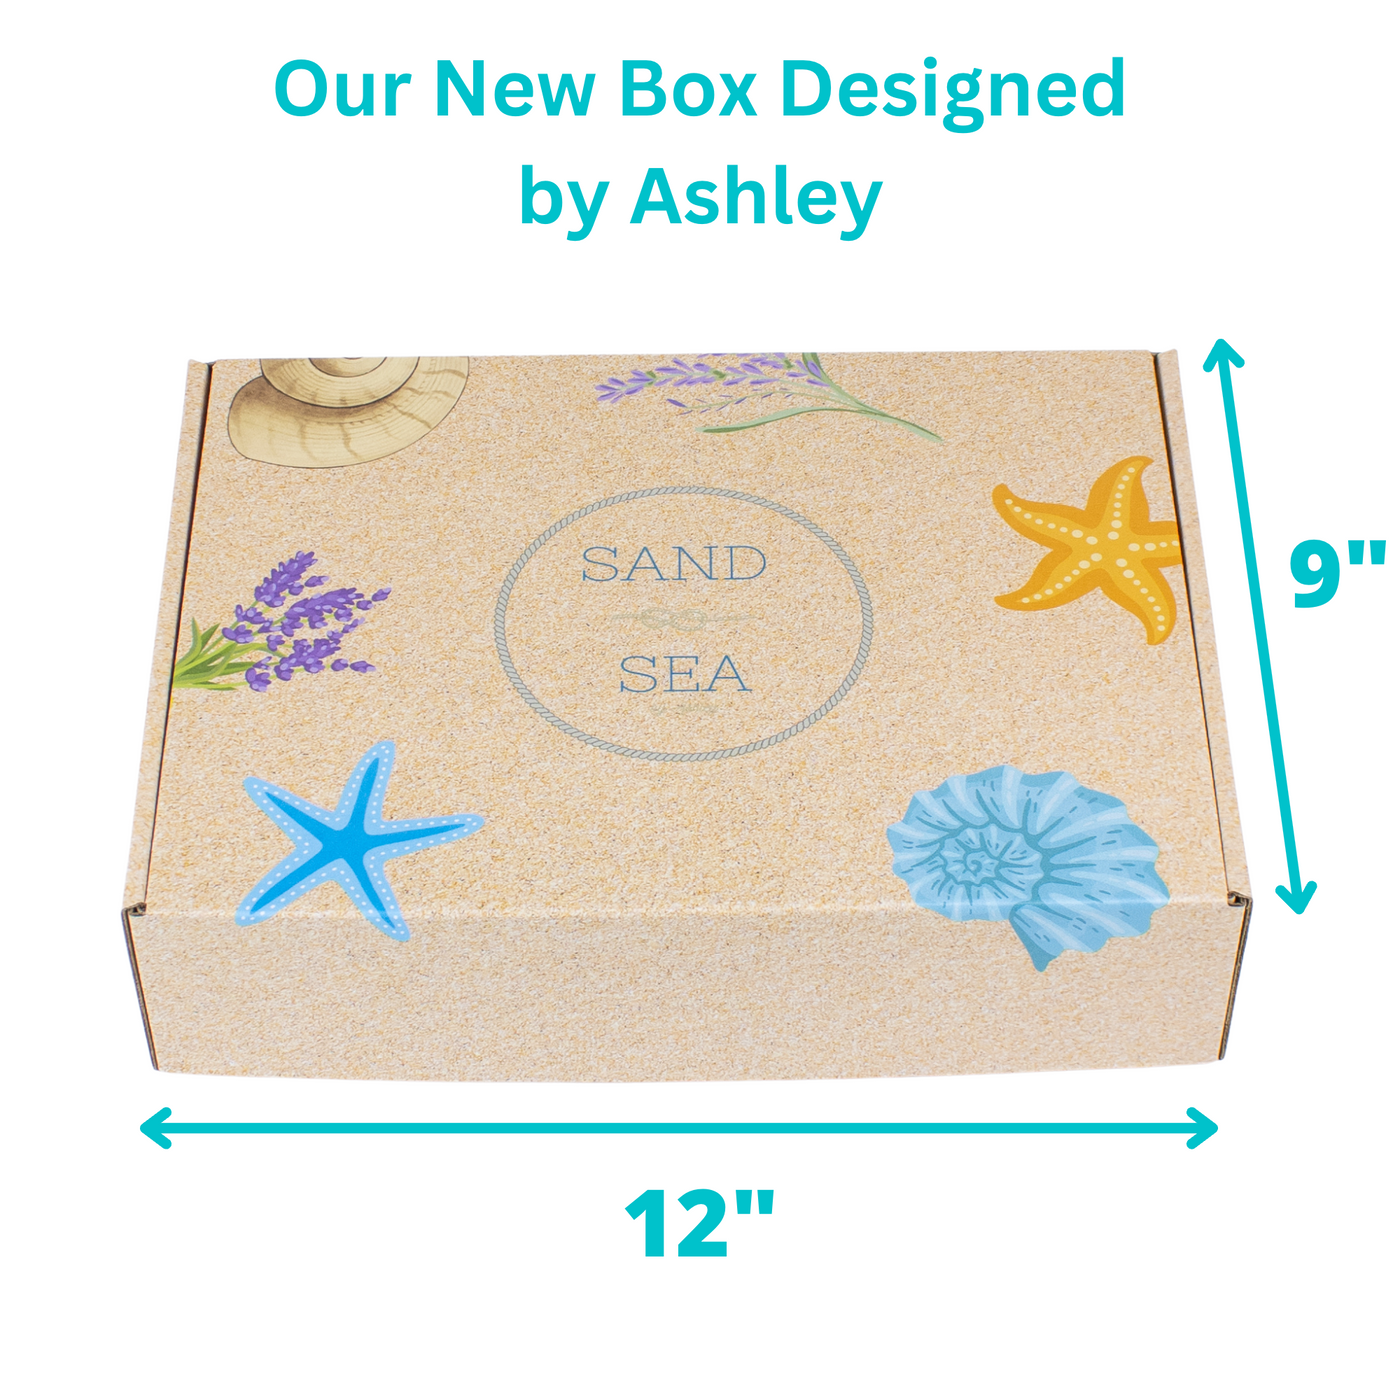 Handmade Ocean Dream Spa Gift Baskets- Self Care Gift Box with Turkish Peshtemal 13 pieces - Sand & Sea by Ashley